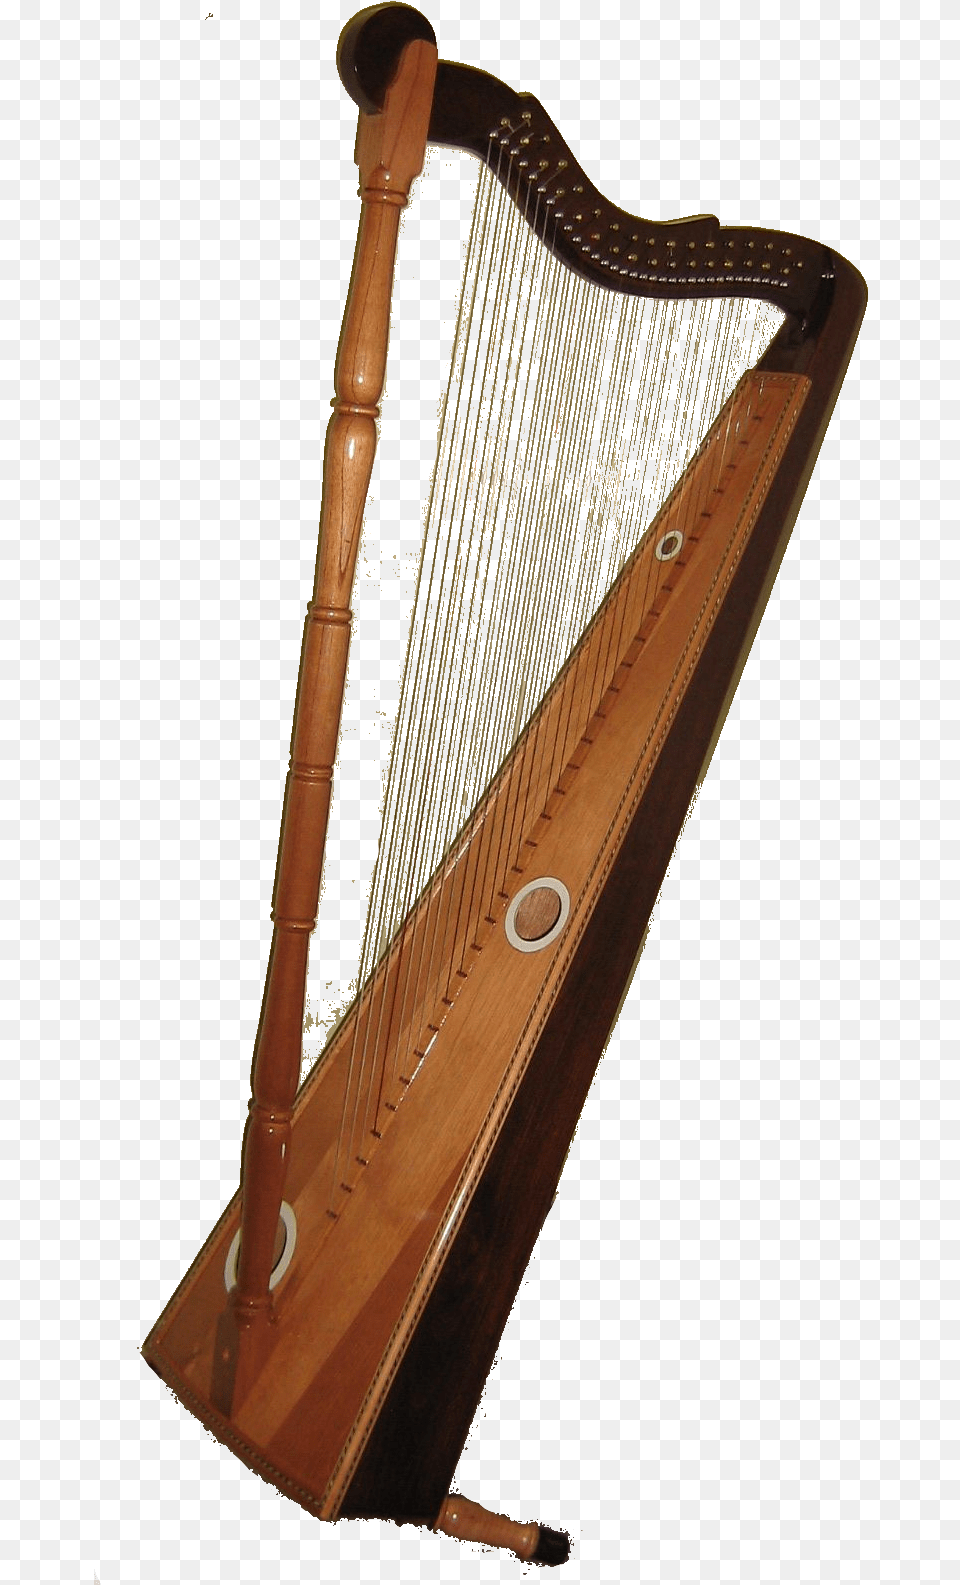 Harp, Musical Instrument Png Image